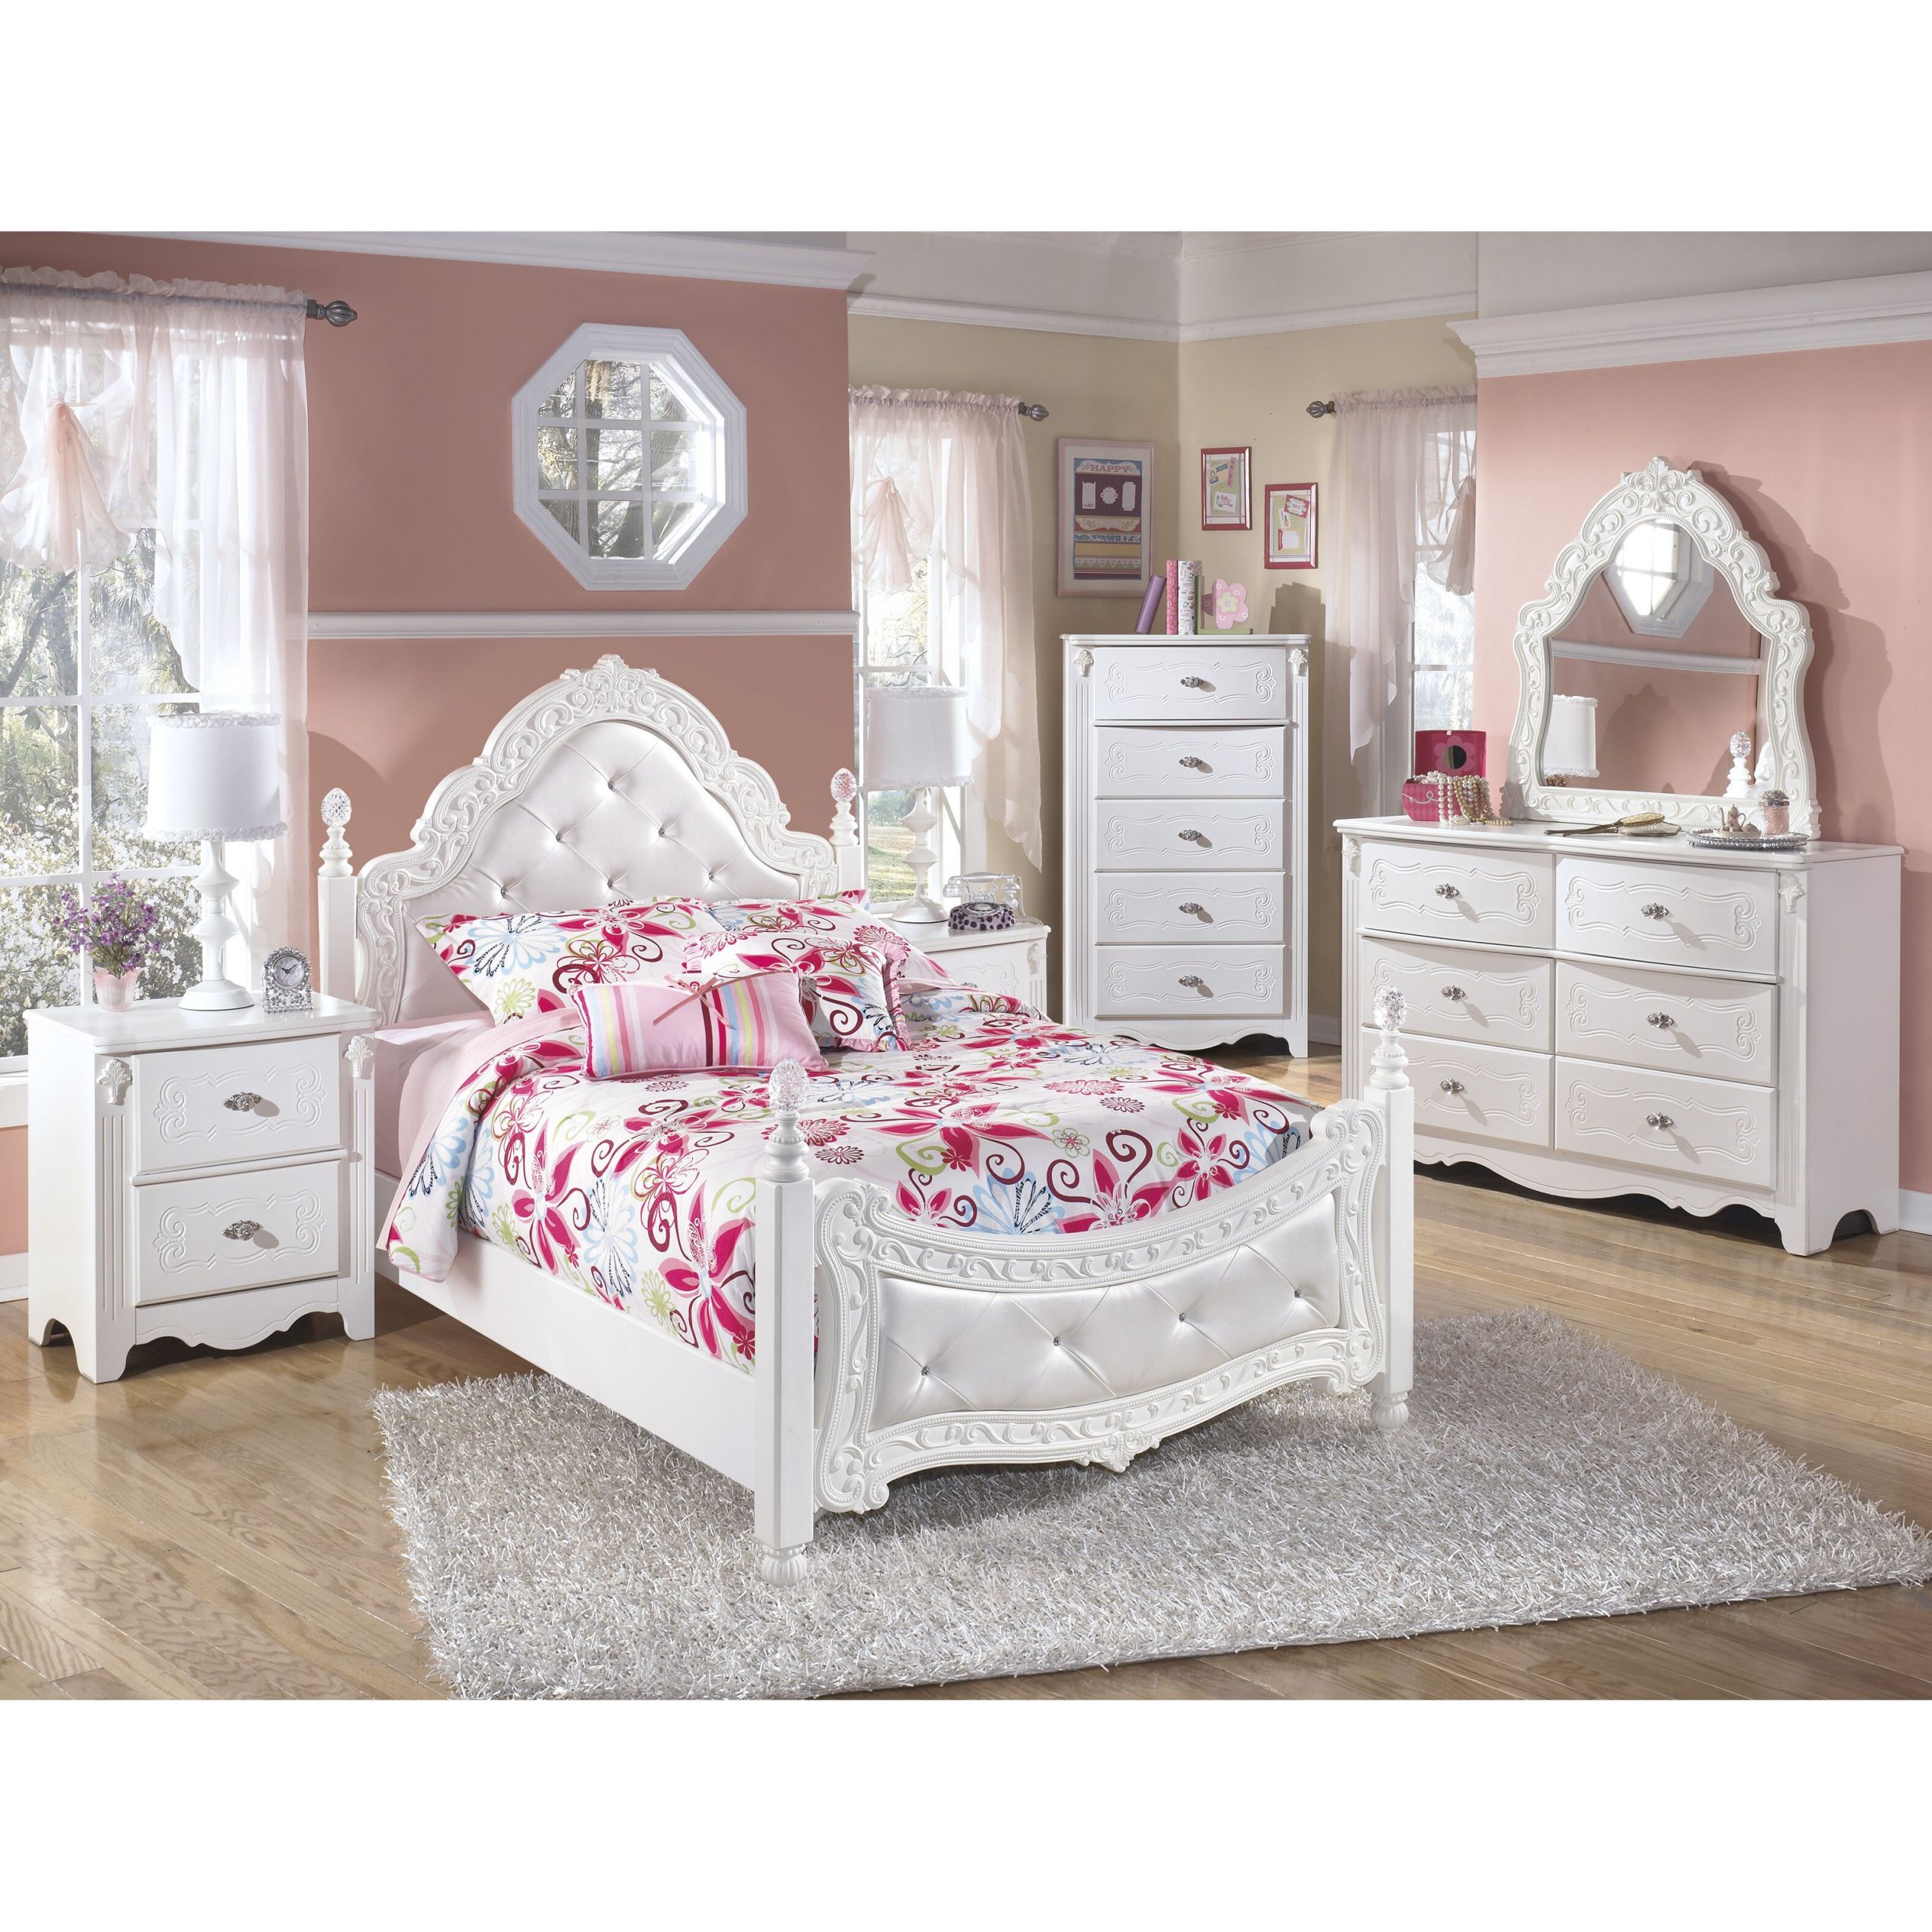 Room Set For Kids
 Signature Design by Ashley Exquisite Four Poster